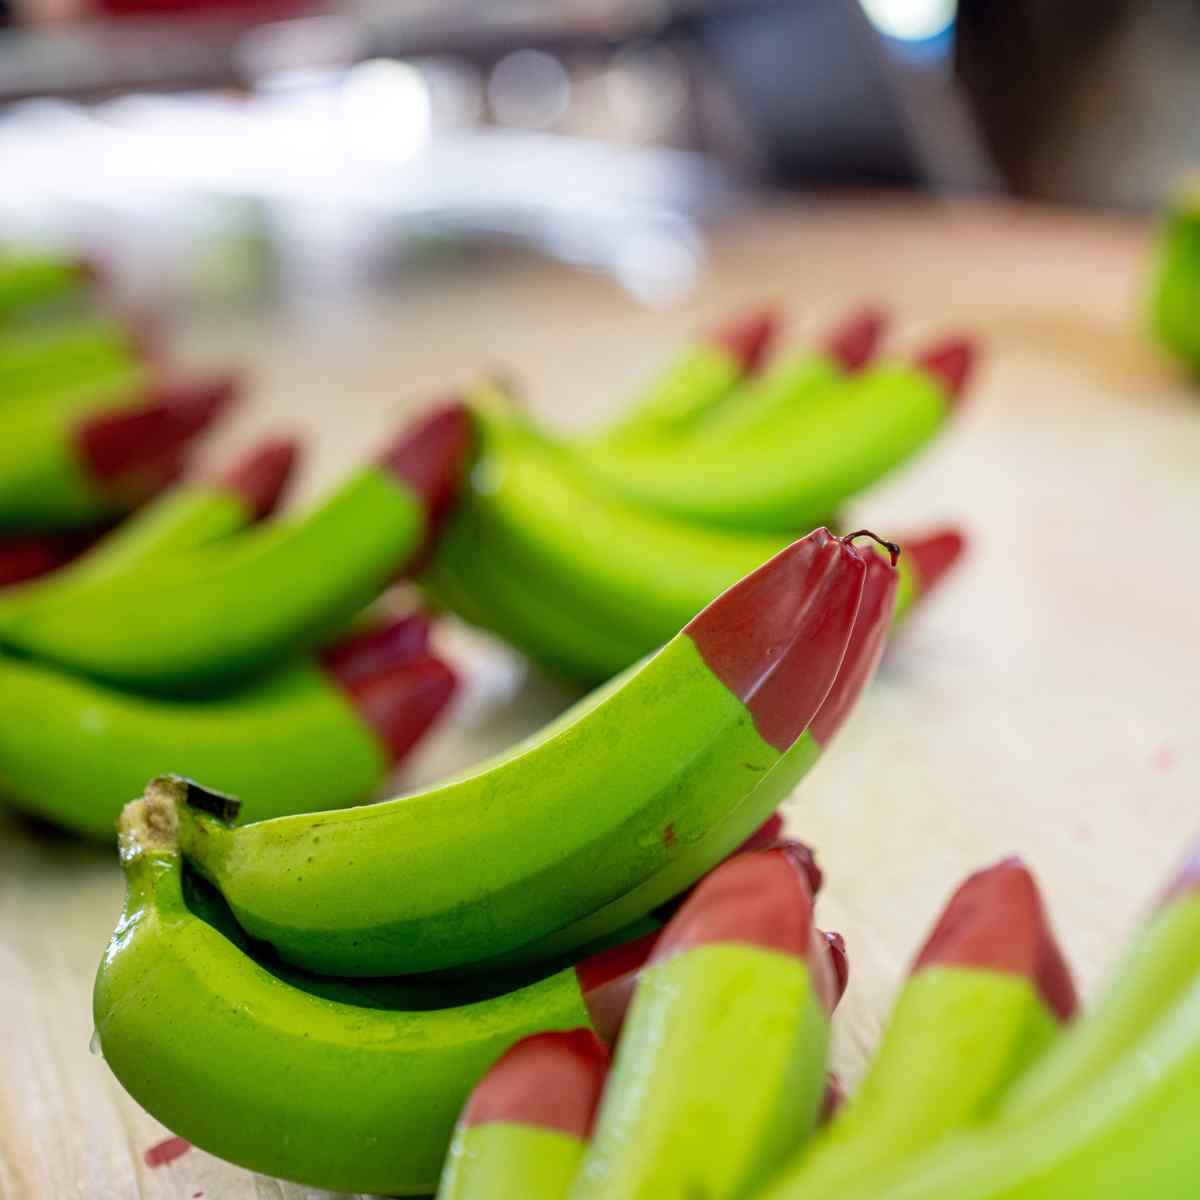 Bunches of bananas with tips dipped in red wax.